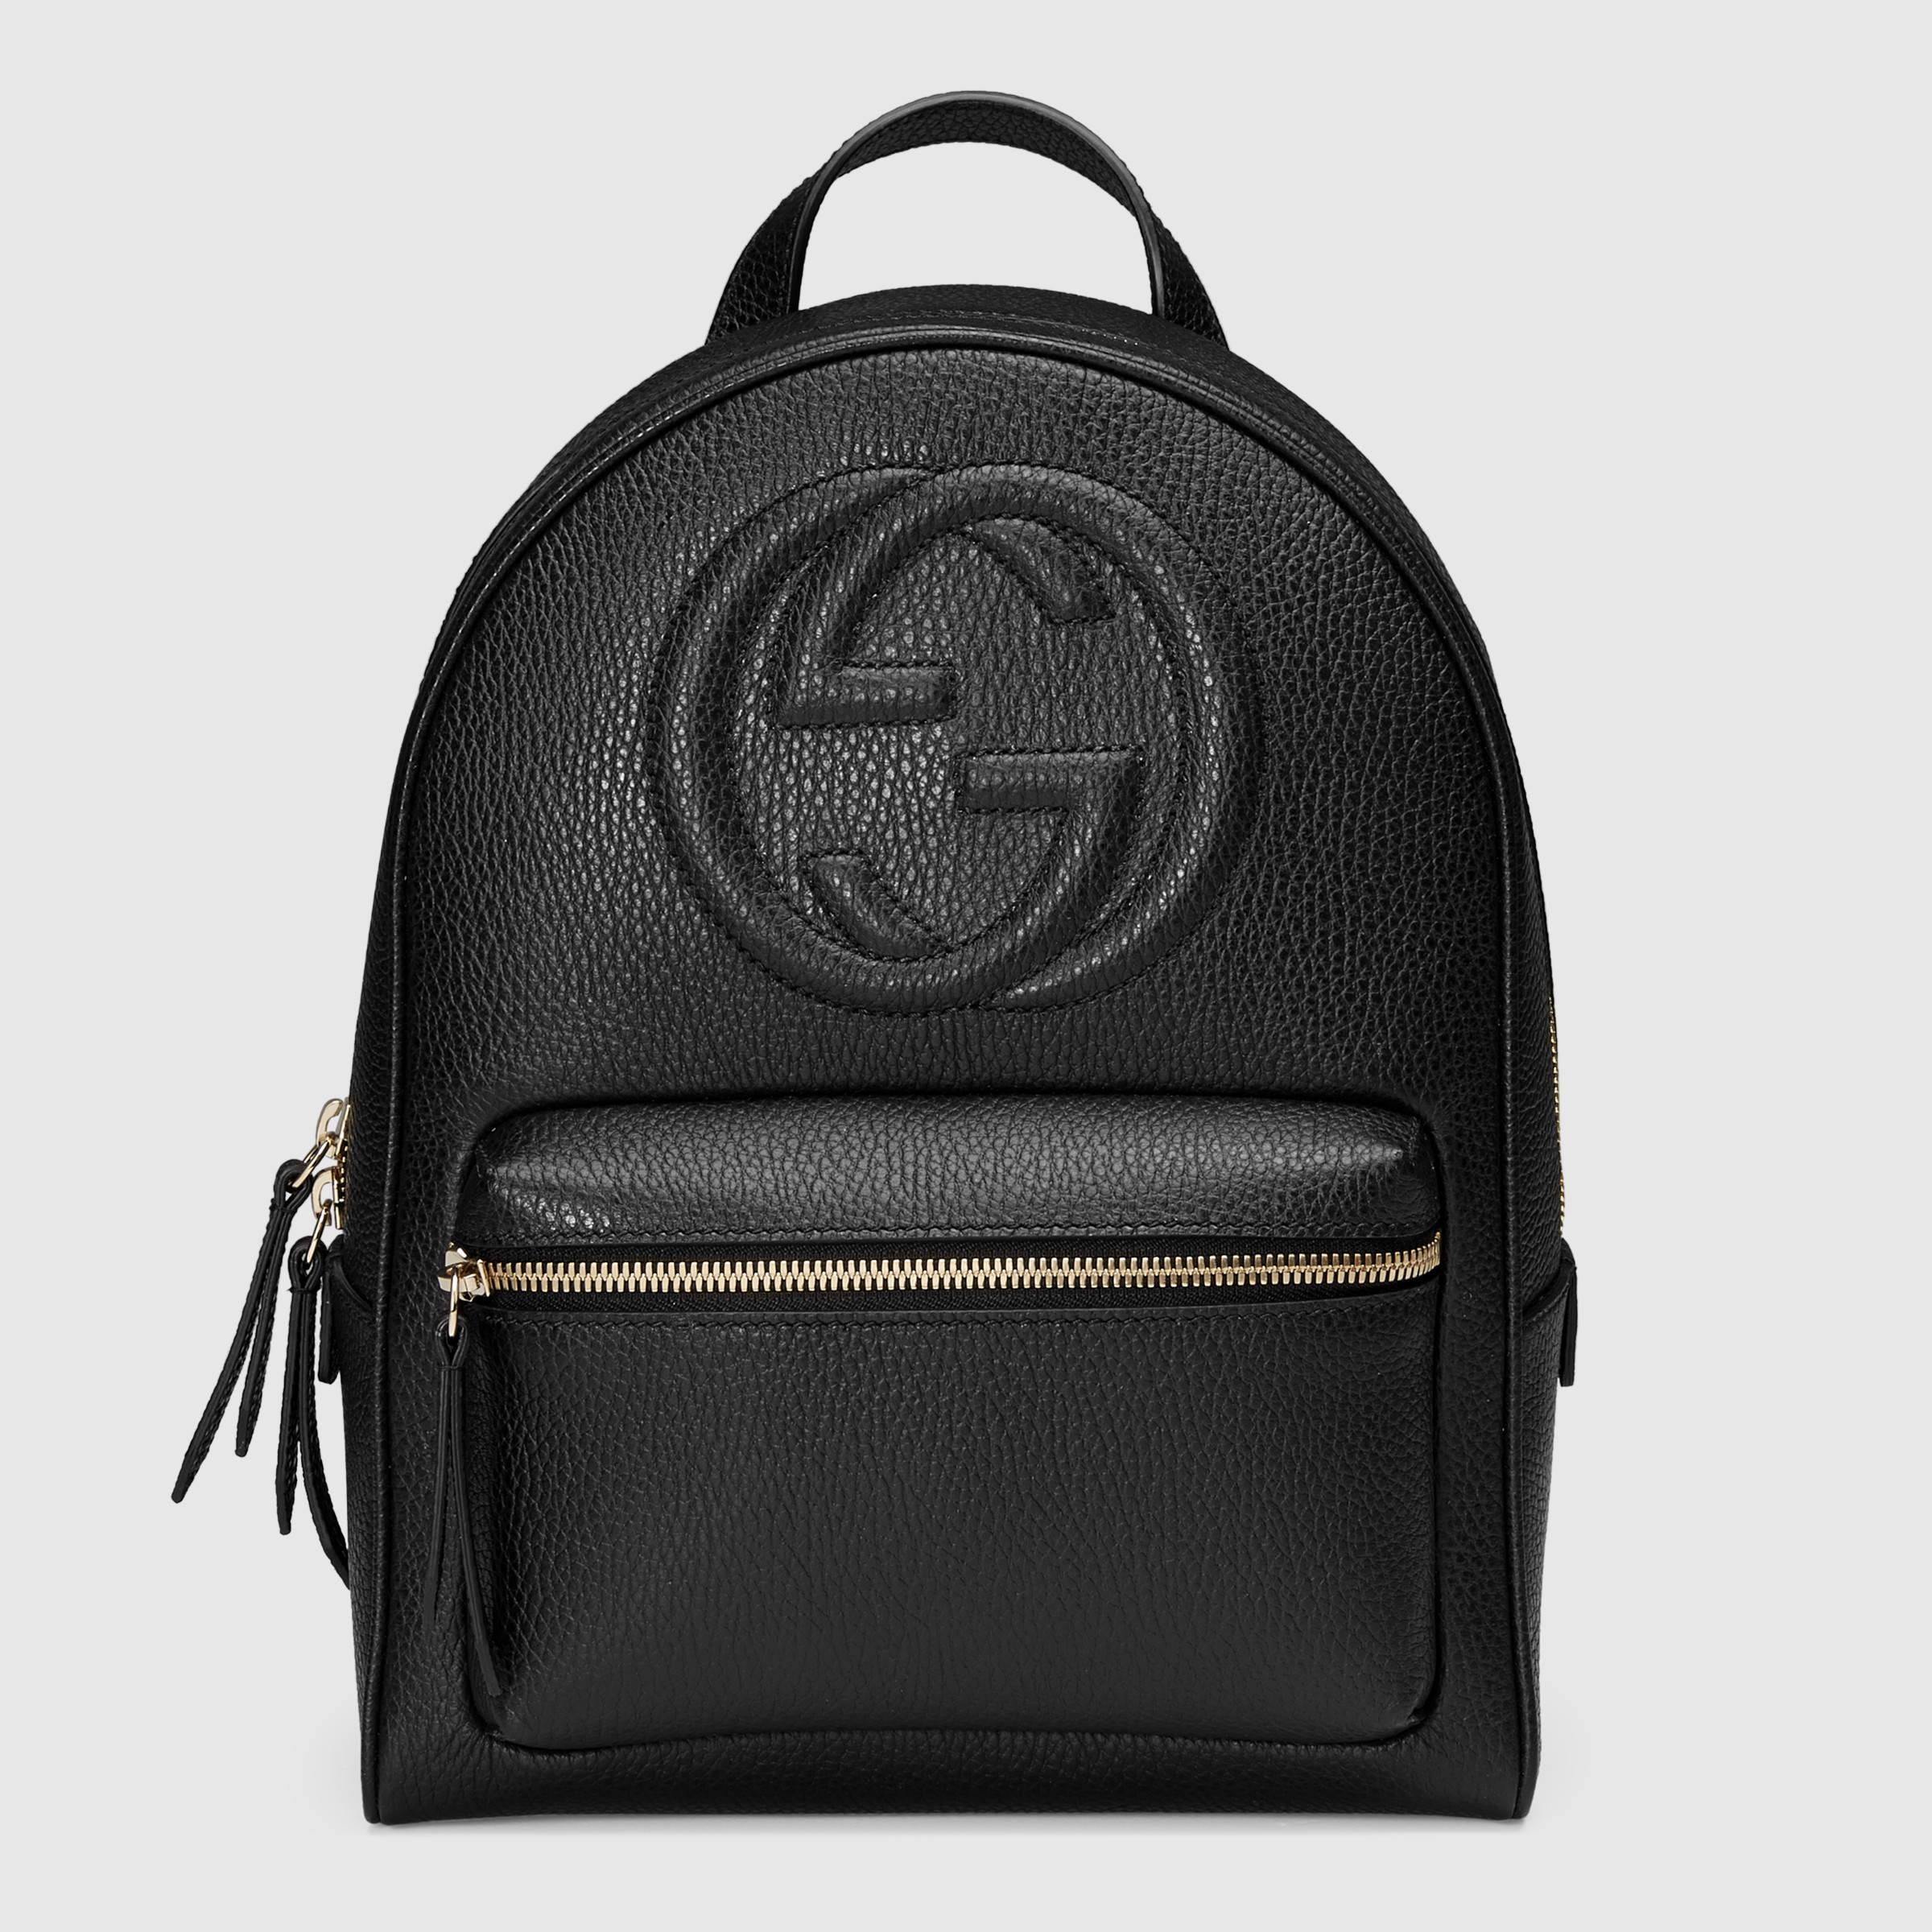 Gucci Soho Leather Chain Backpack in Black Leather (Black) - Lyst